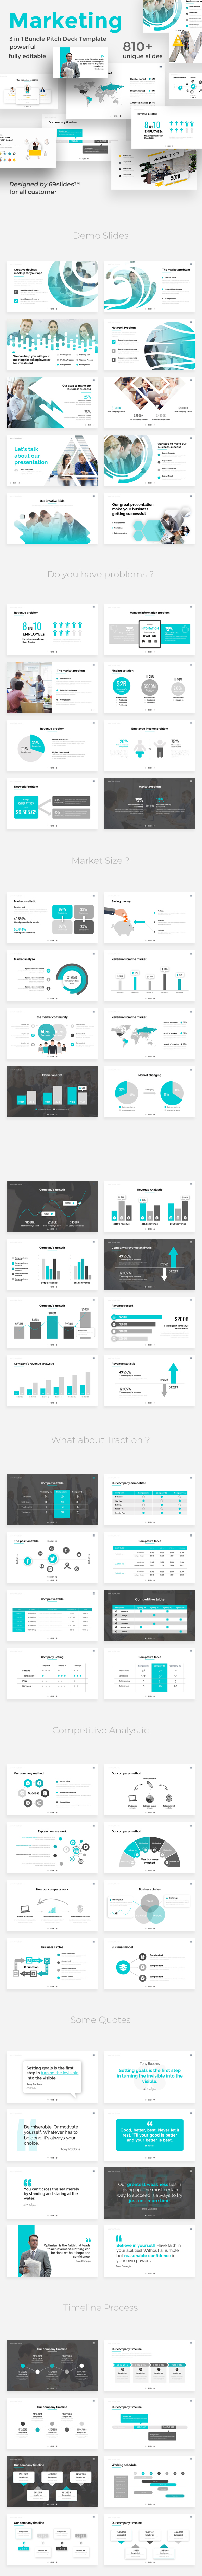 Marketing Assessment 3 in 1 Pitch Deck Bundle Powerpoint Template